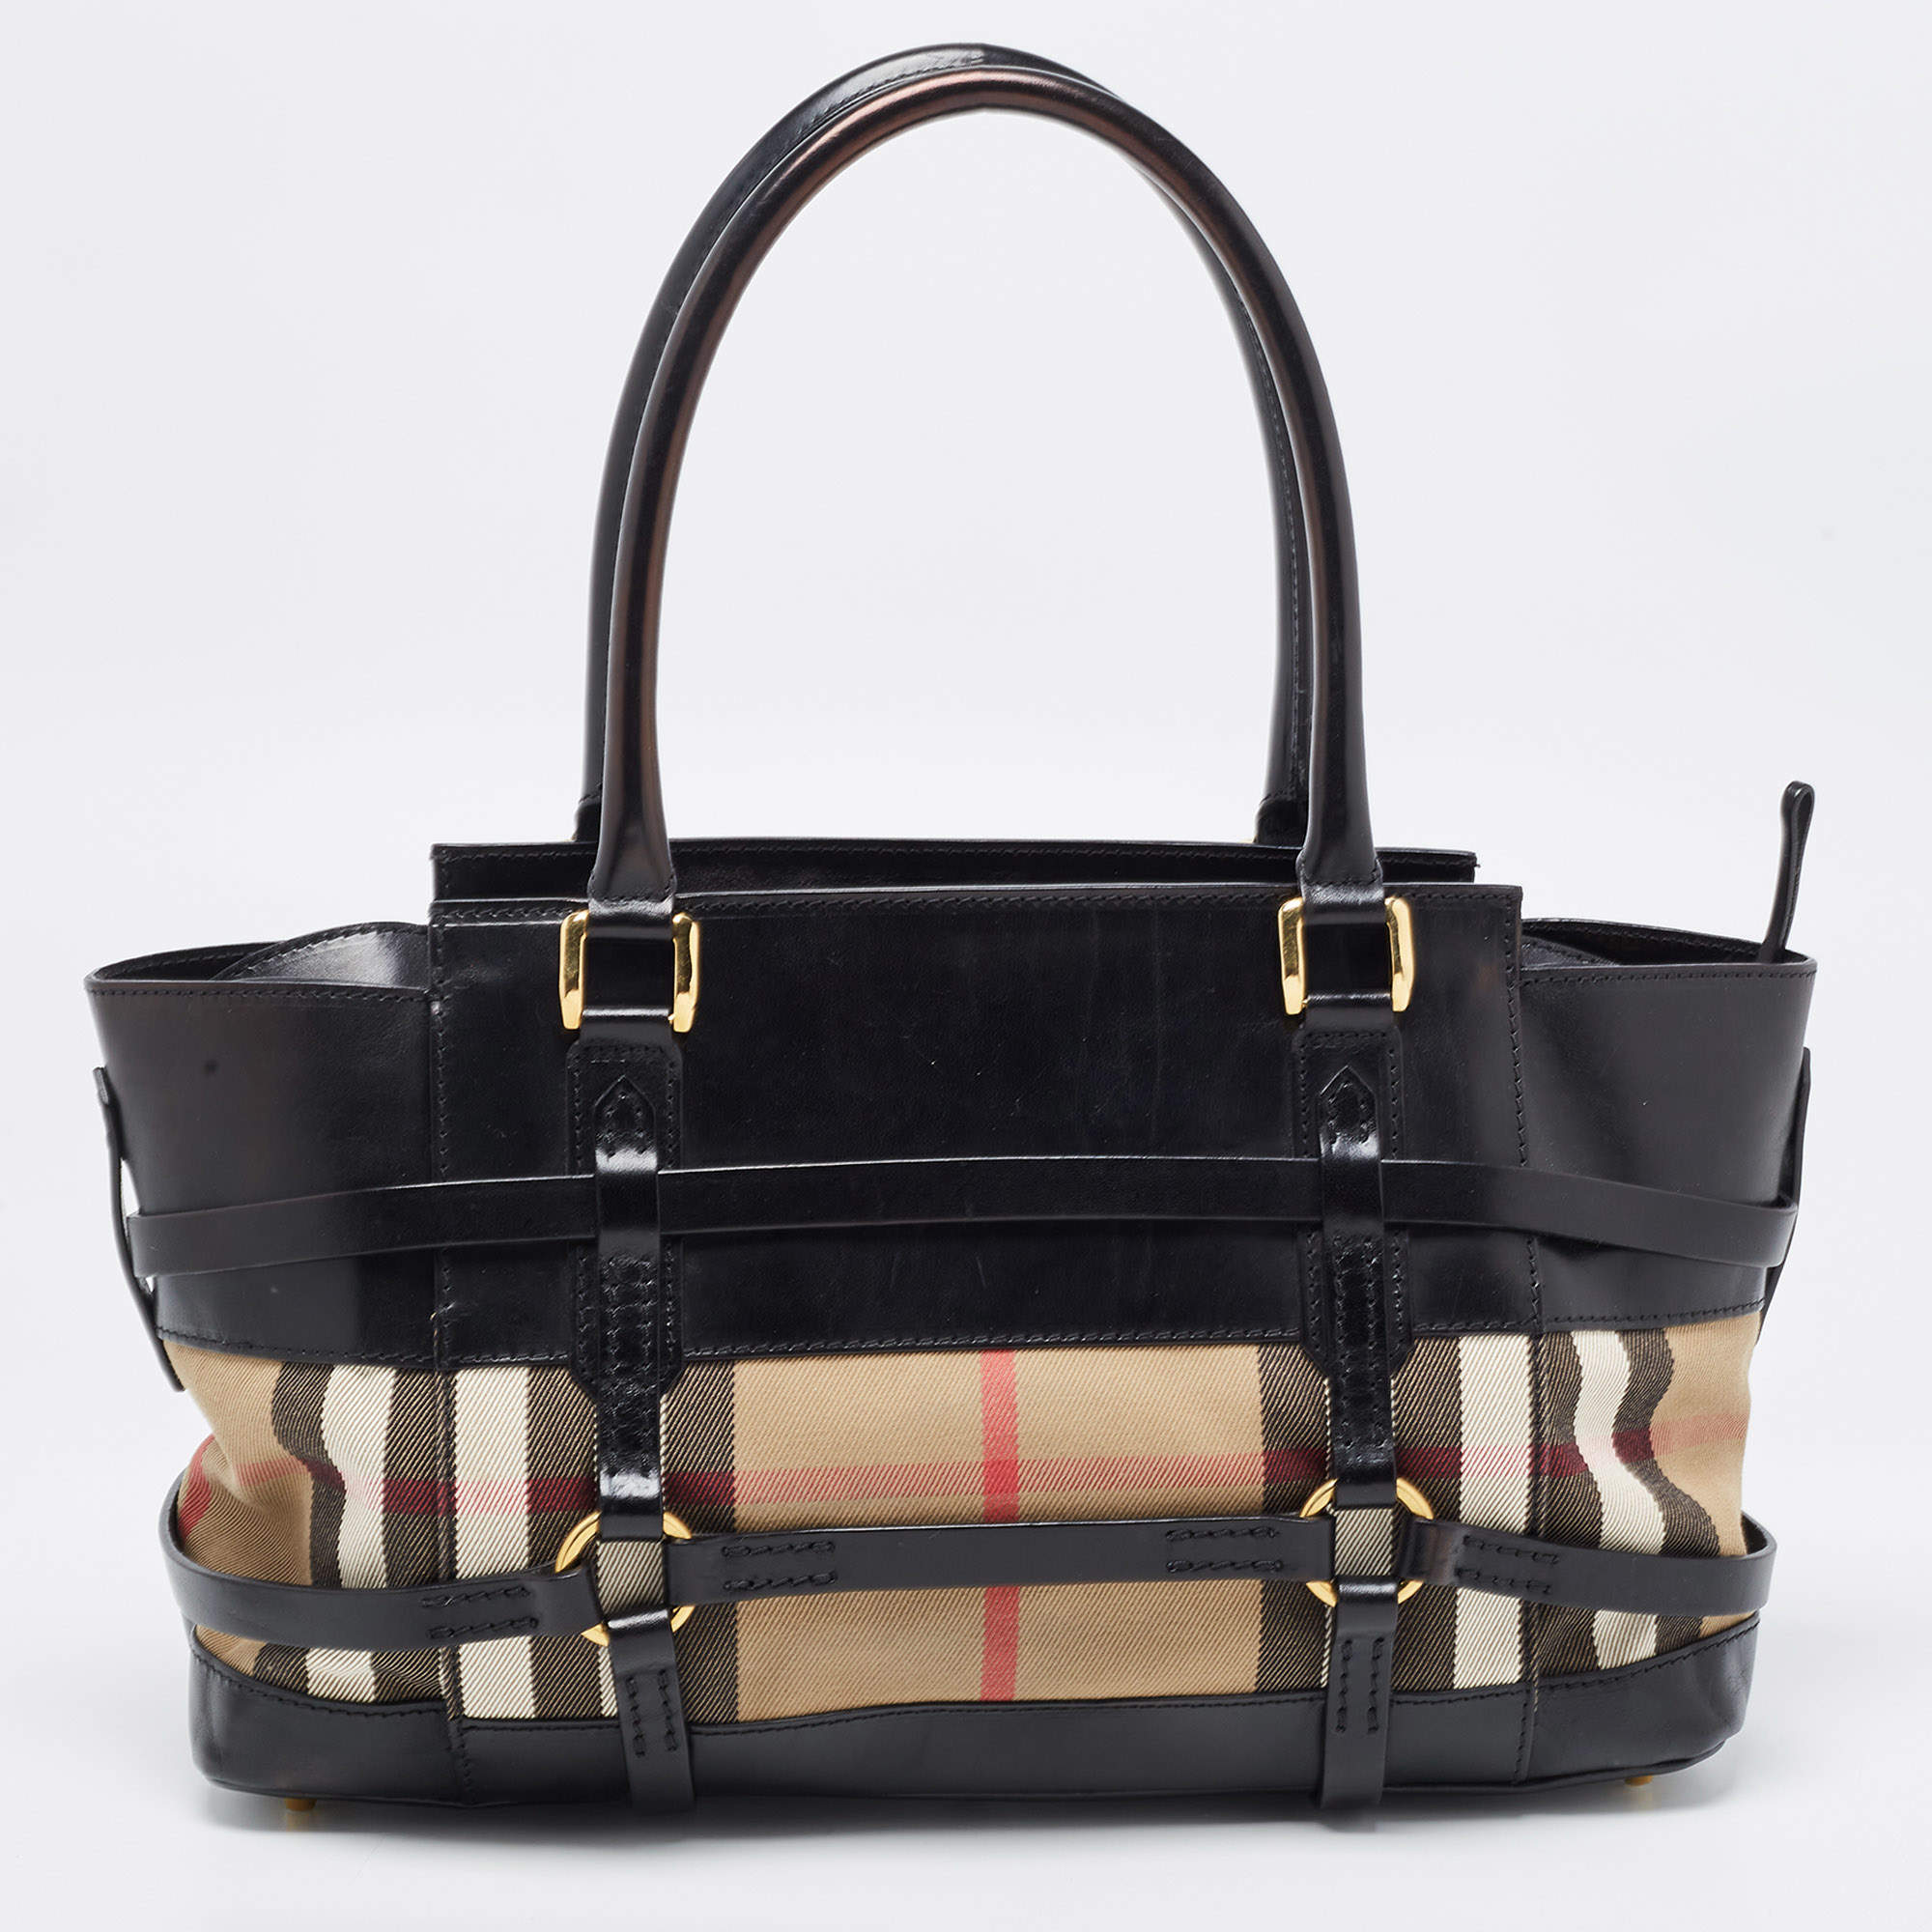 Burberry Black Leather Bridle Tote Bag